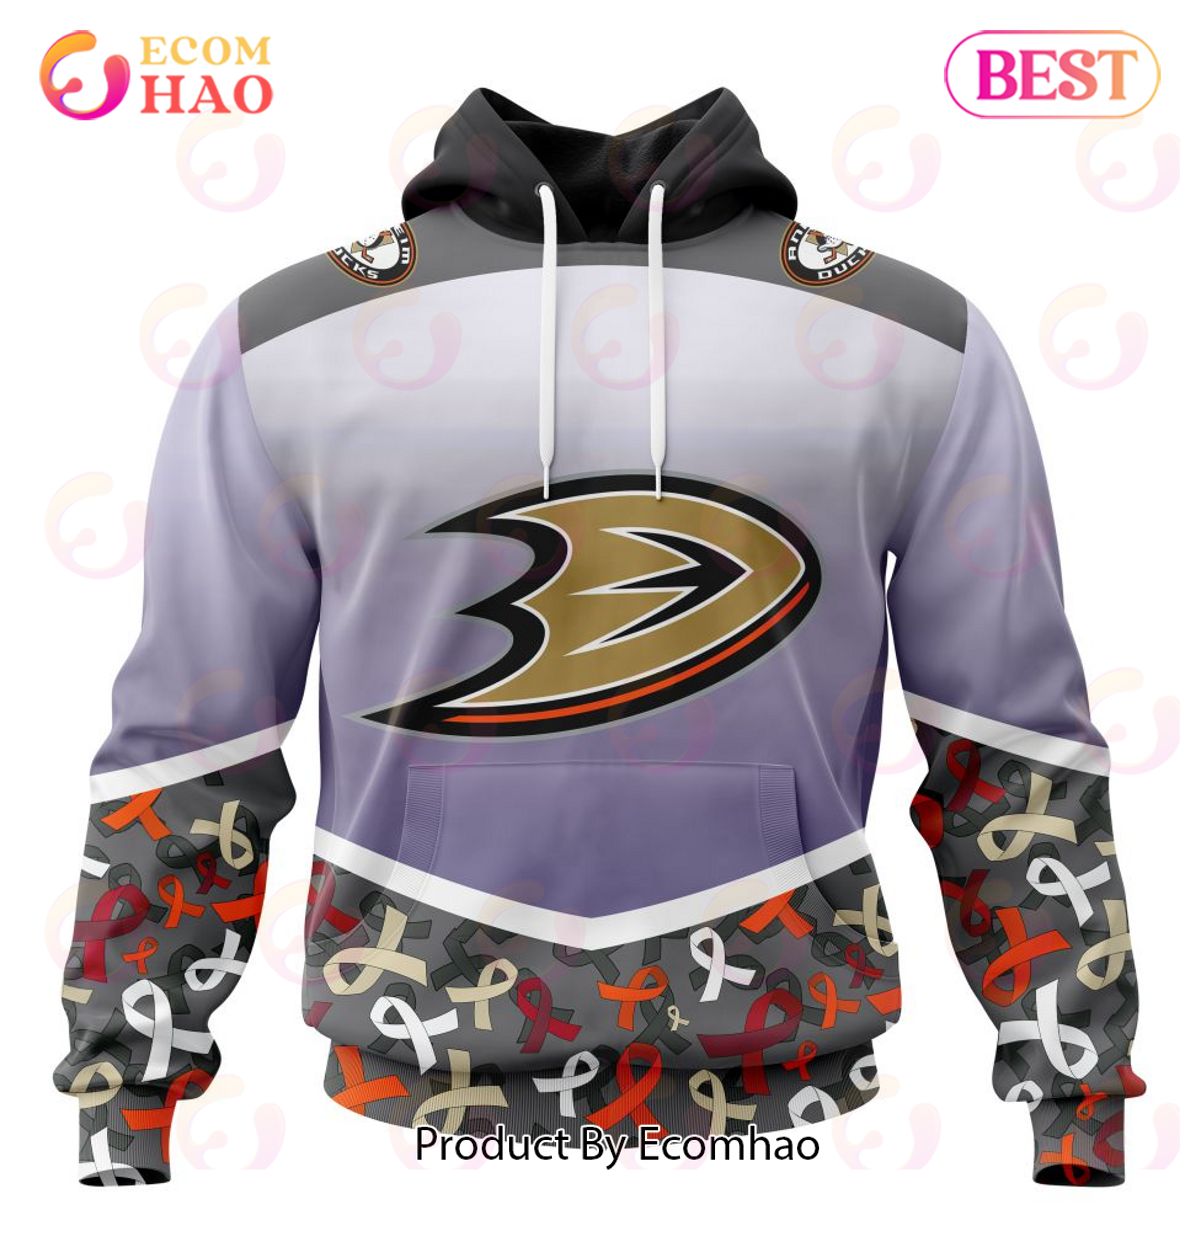 NHL Anaheim Ducks Specialized Sport Fights Again All Cancer 3D Hoodie